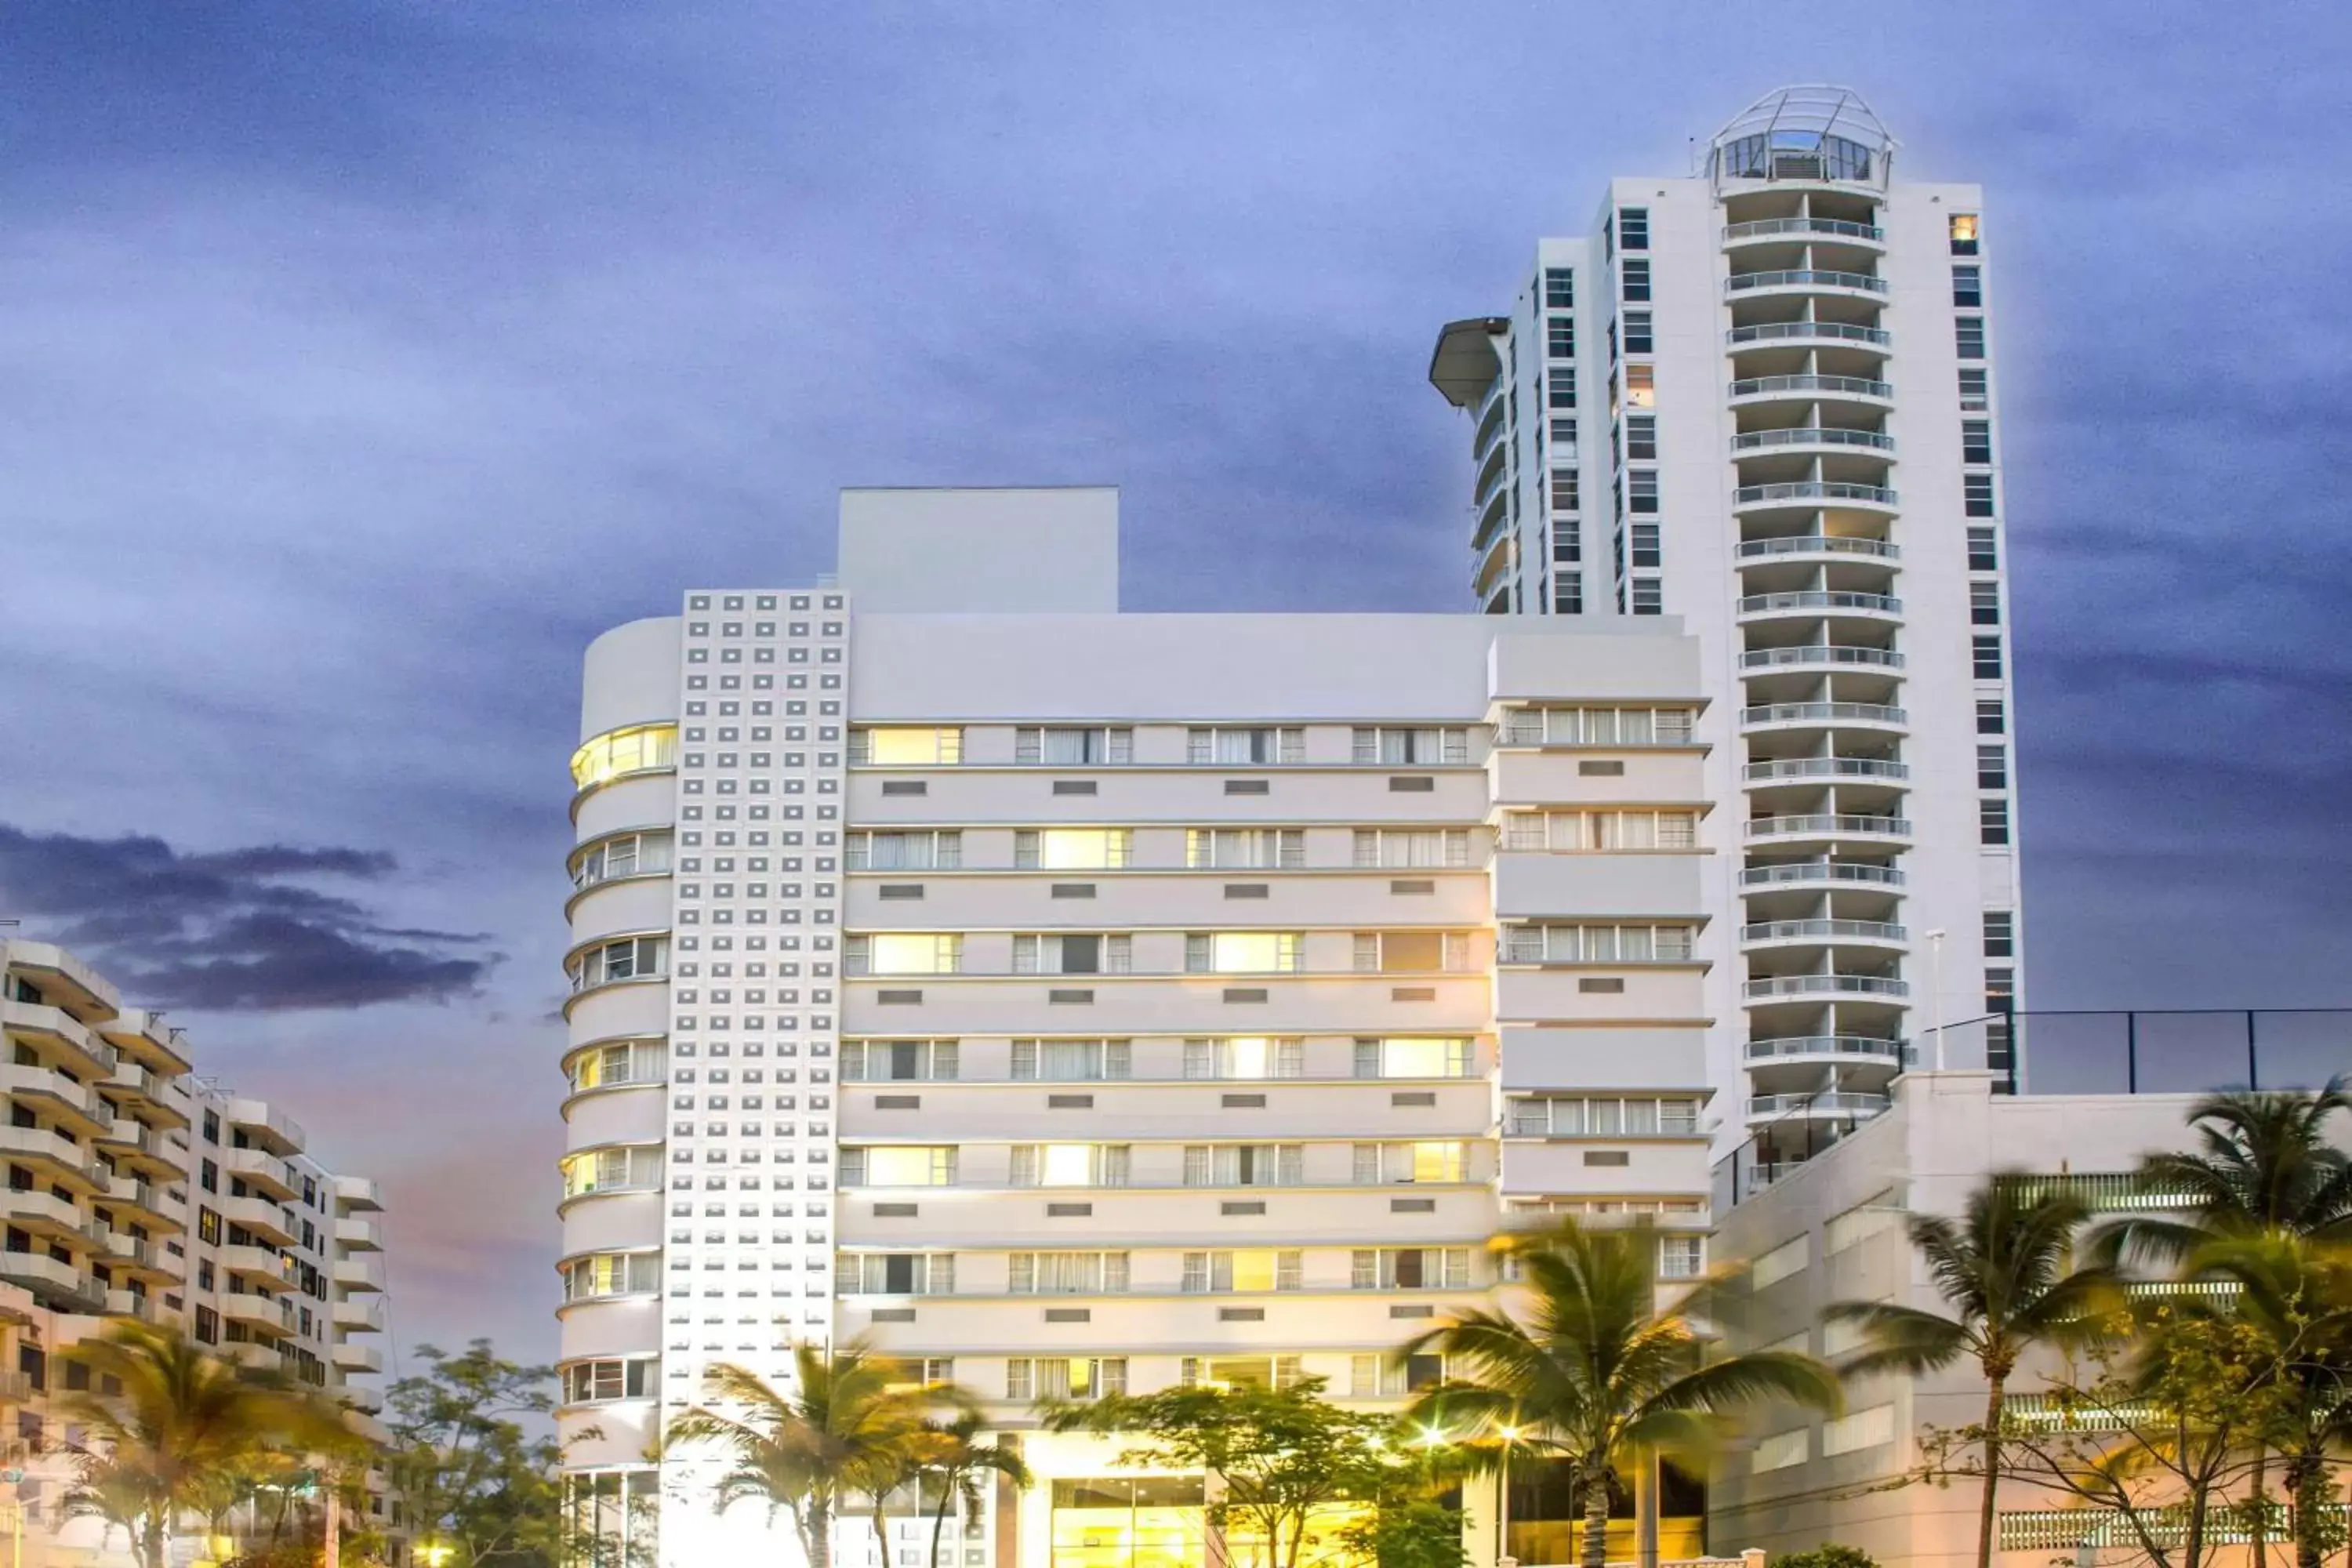 Property Building in Lexington by Hotel RL Miami Beach